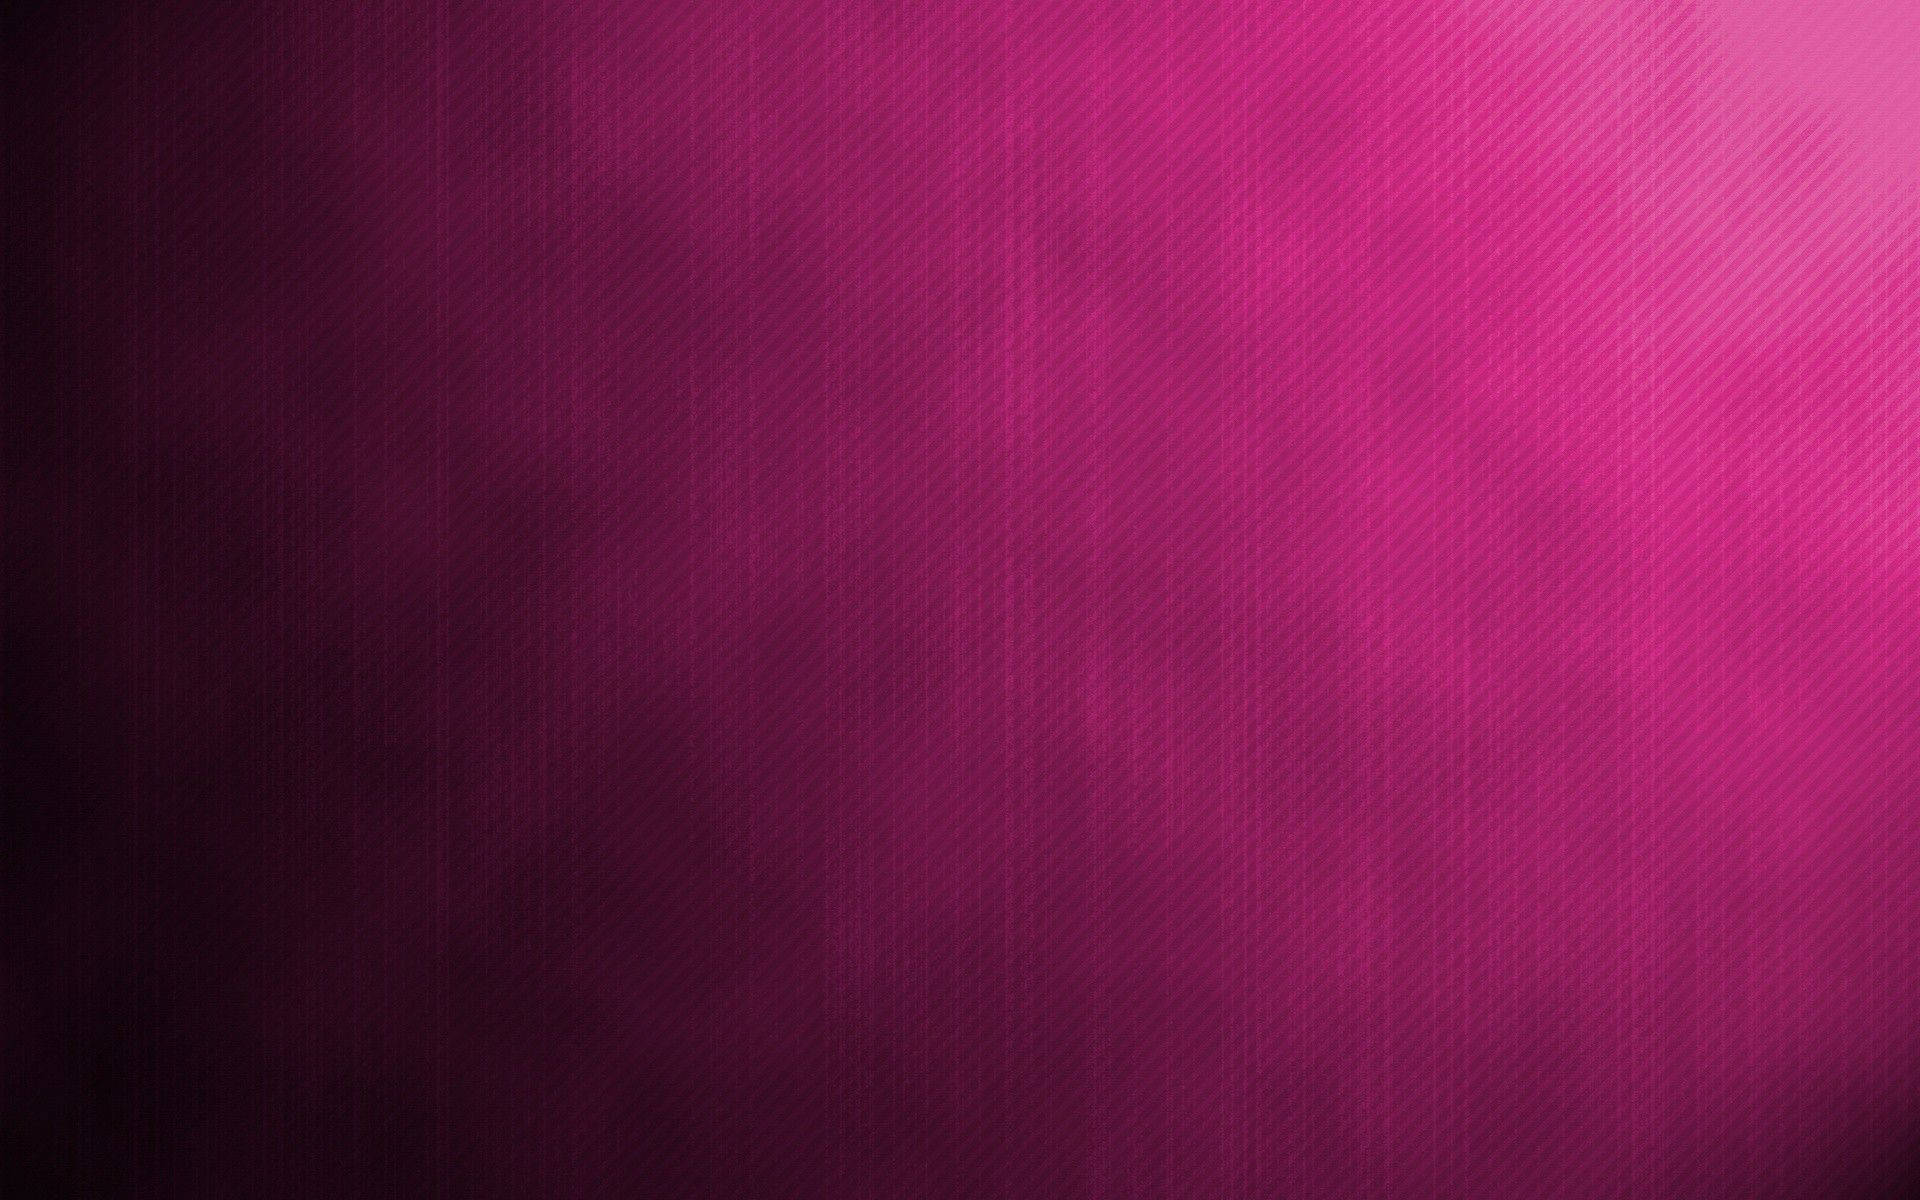 Free Pink Color Wallpaper Downloads, [100+] Pink Color Wallpapers for FREE  